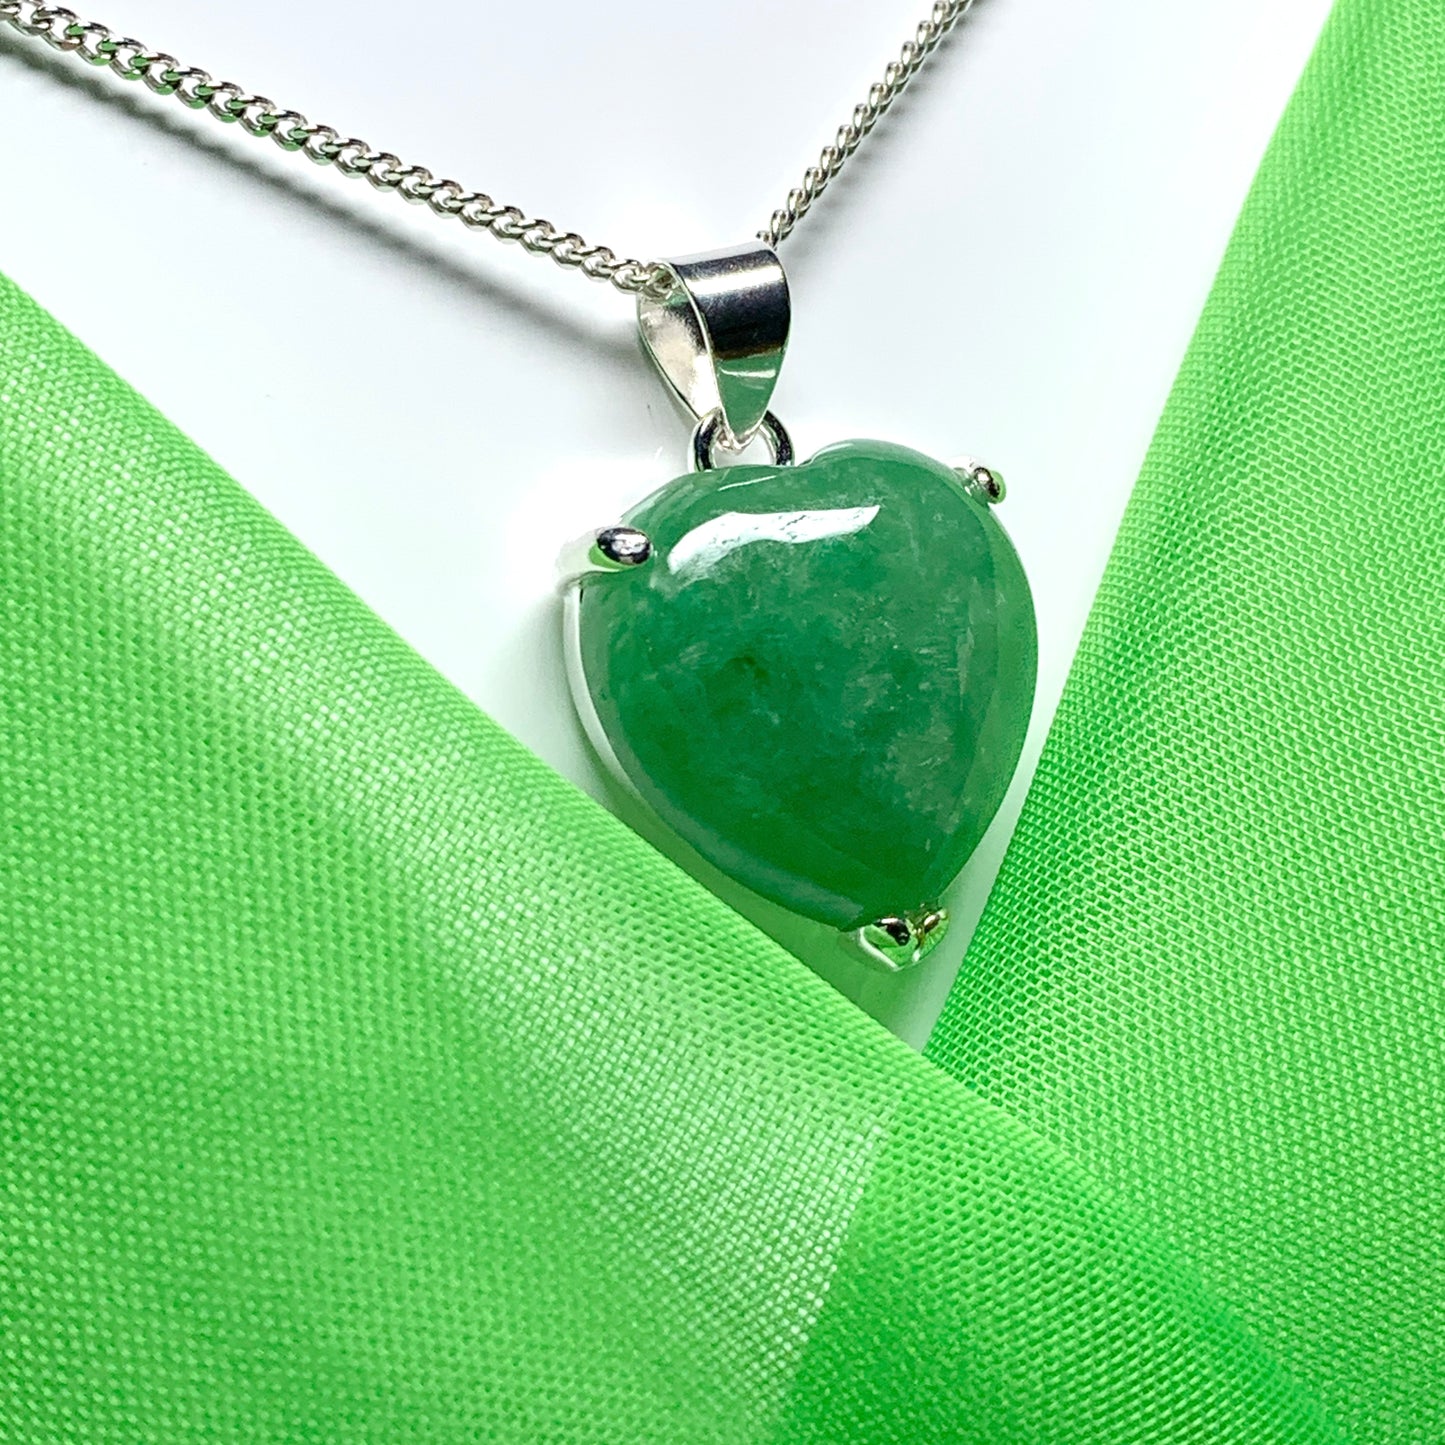 Real Green Jade Necklace Heart Shaped Sterling Silver